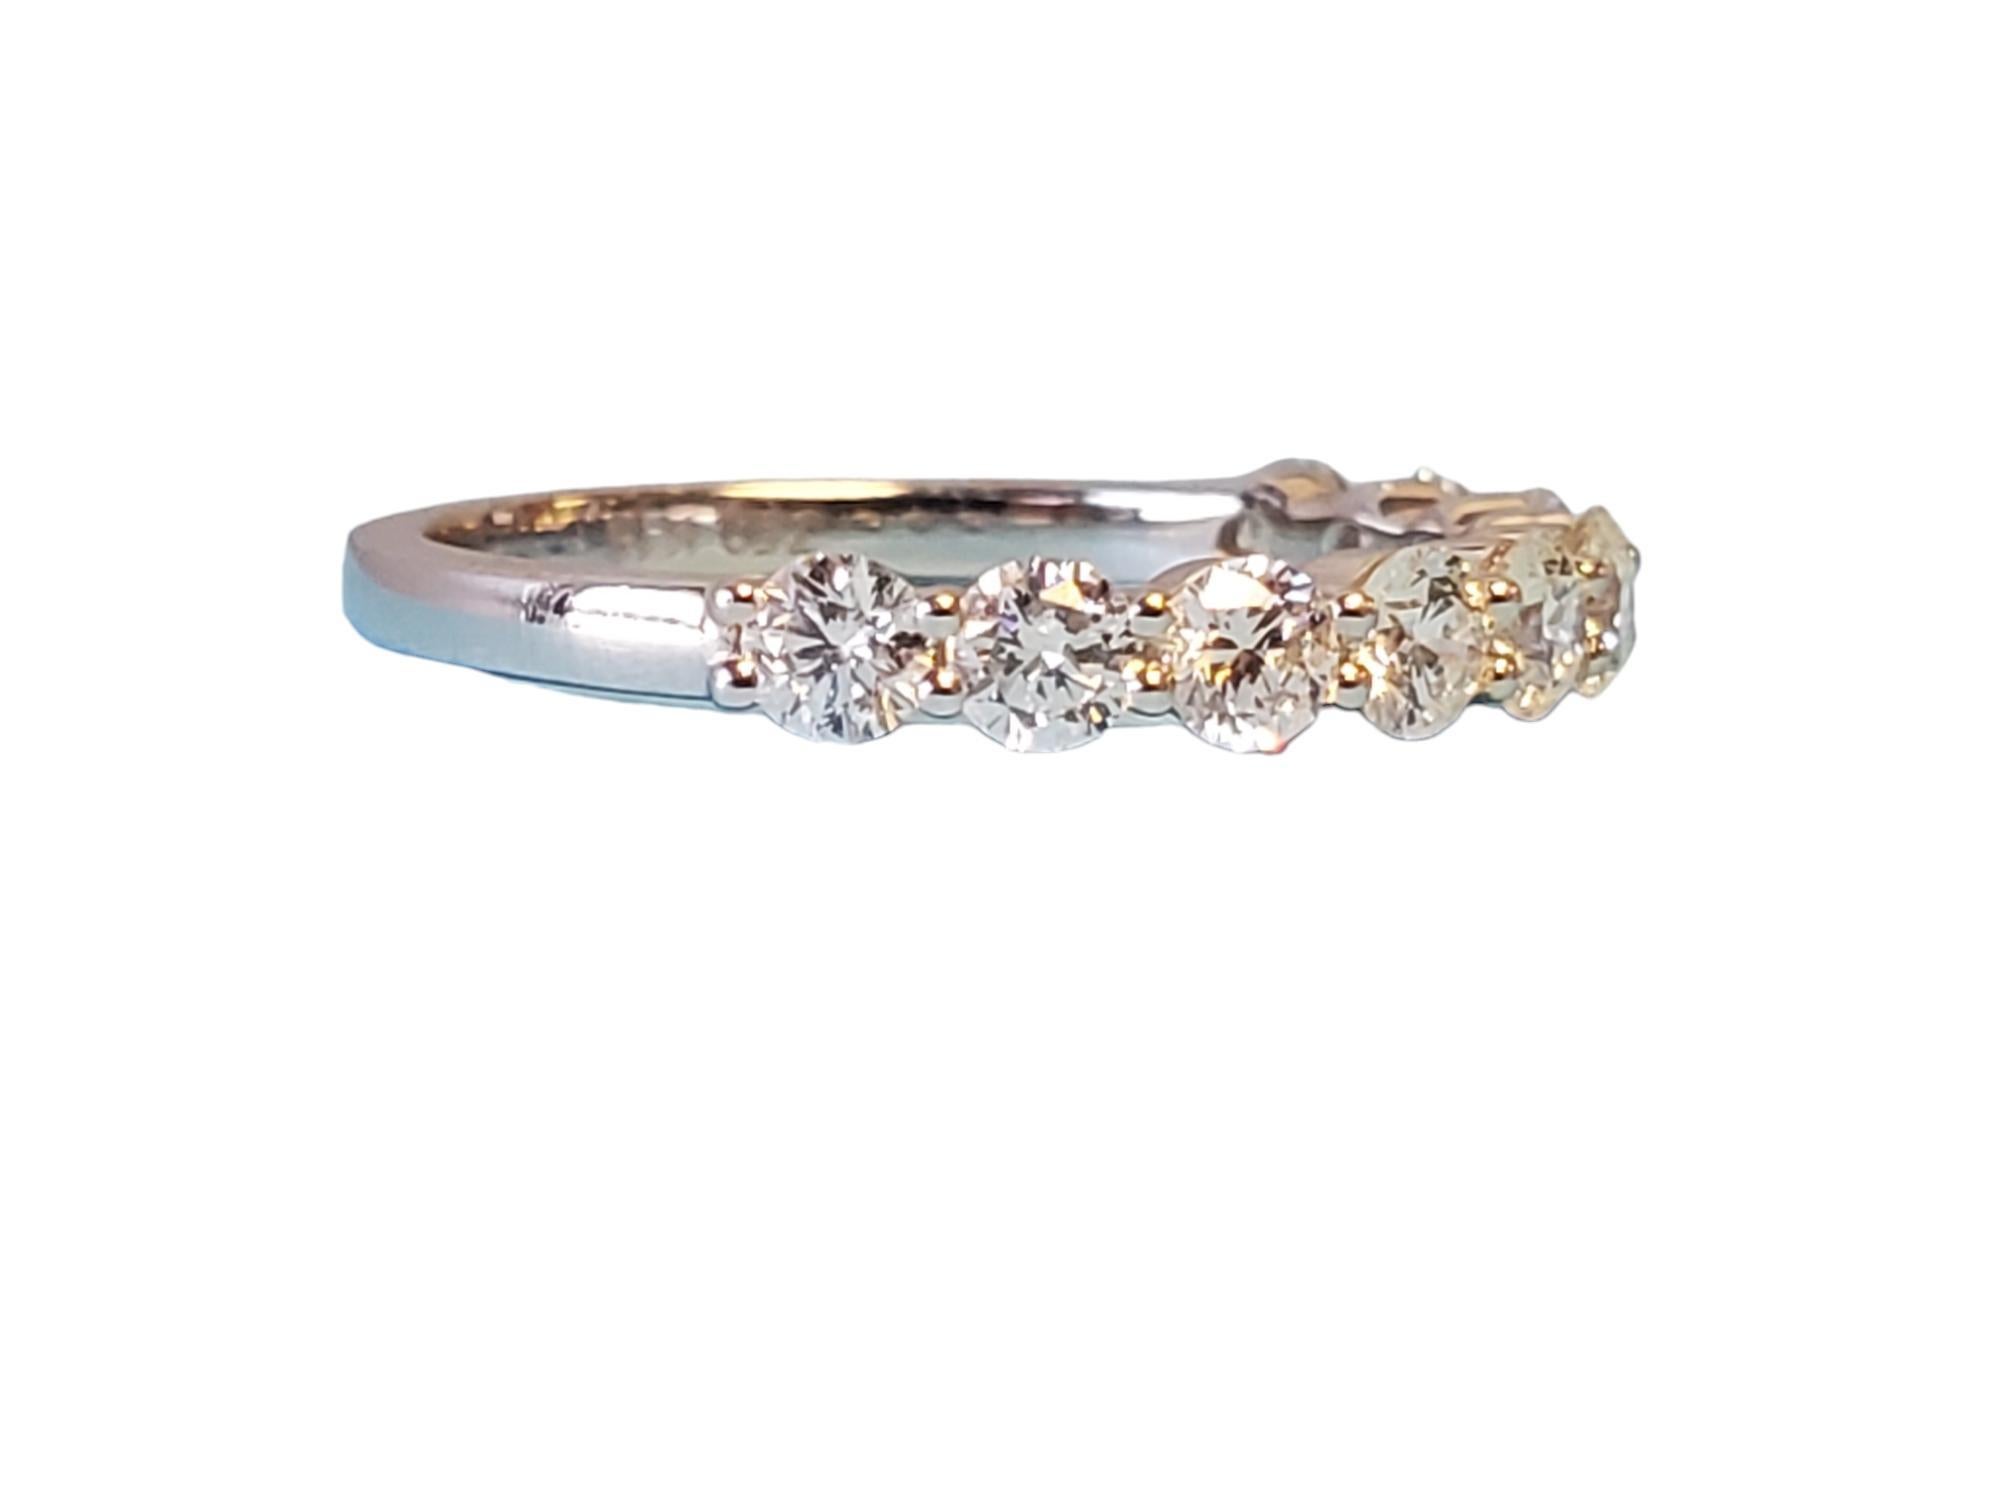 18k White gold half eternity band - closeout piece. Unworn, gorgeous half eternity band. This band features 1.00tcw white vs diamonds that exhibit fire and scintillation. The size is 6.5, ready to wear